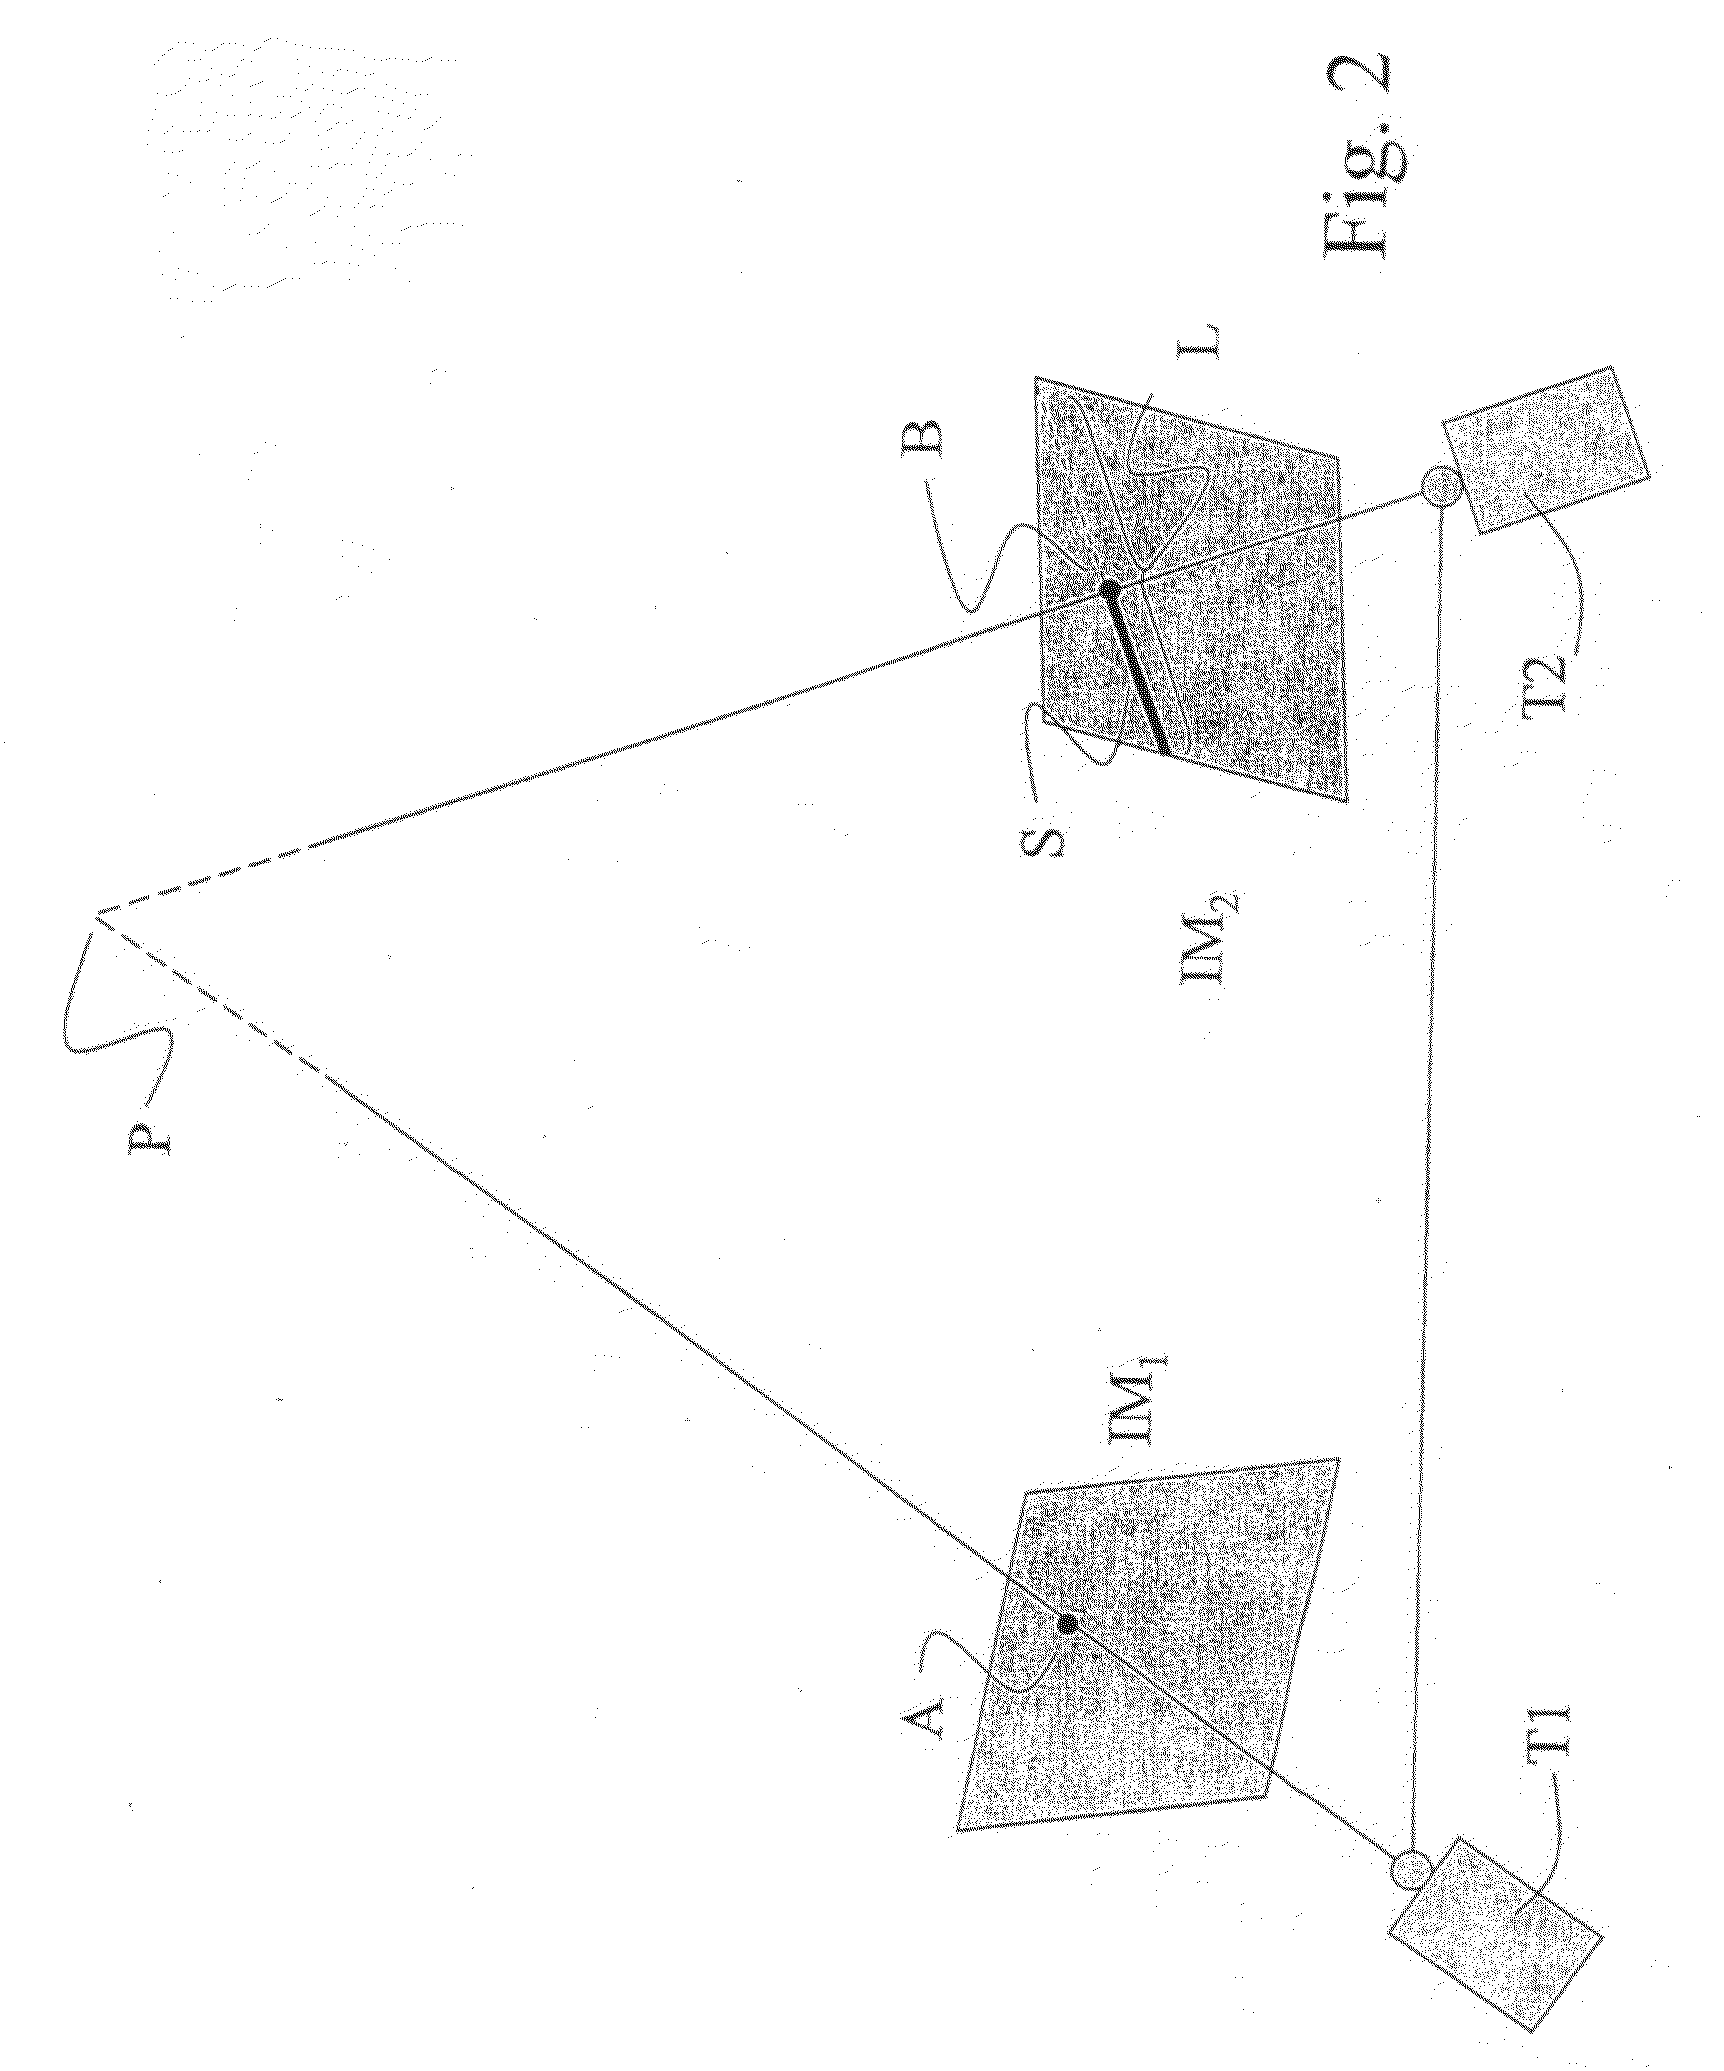 Method for Determining Scattered Disparity Fields in Stereo Vision